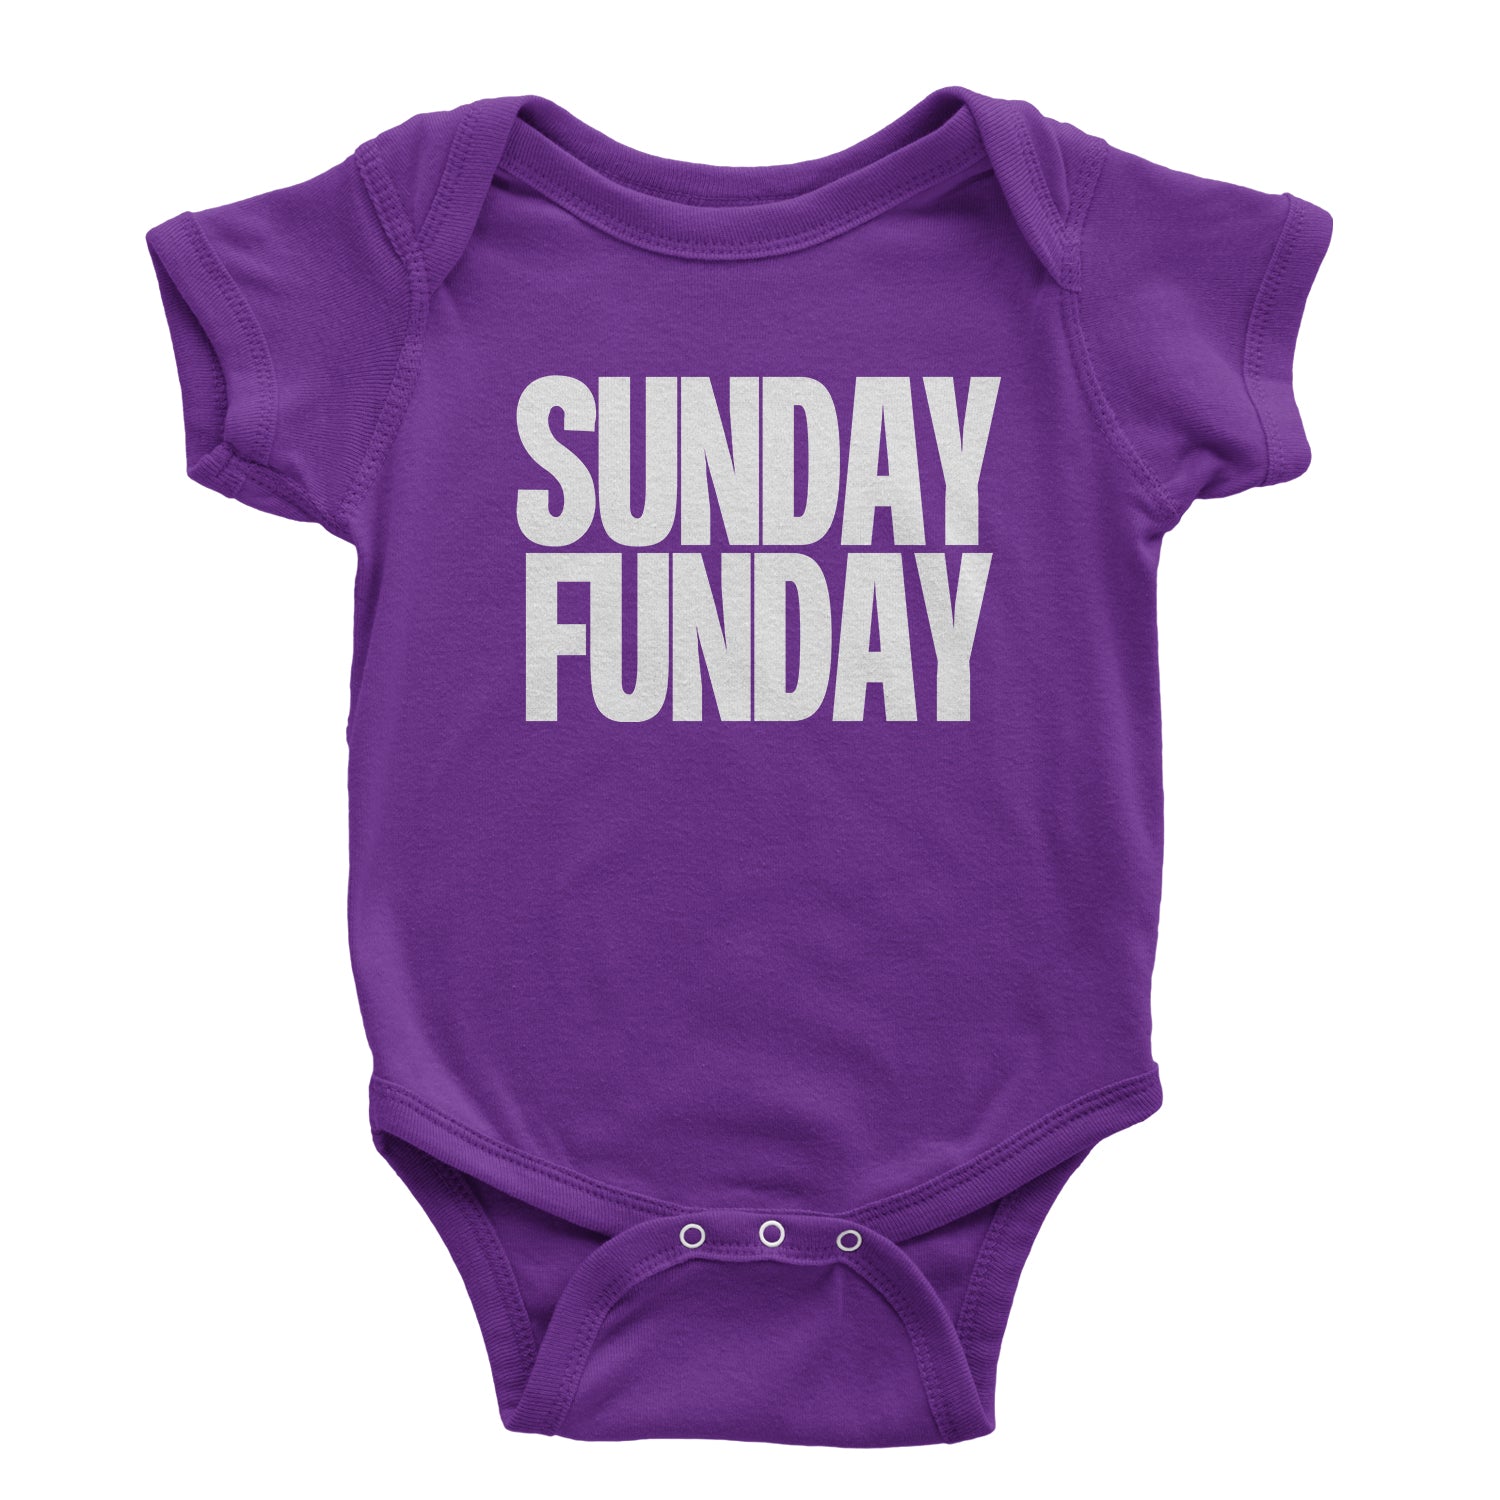 Sunday Funday Infant One-Piece Romper Bodysuit day, drinking, fun, funday, partying, sun, Sunday by Expression Tees